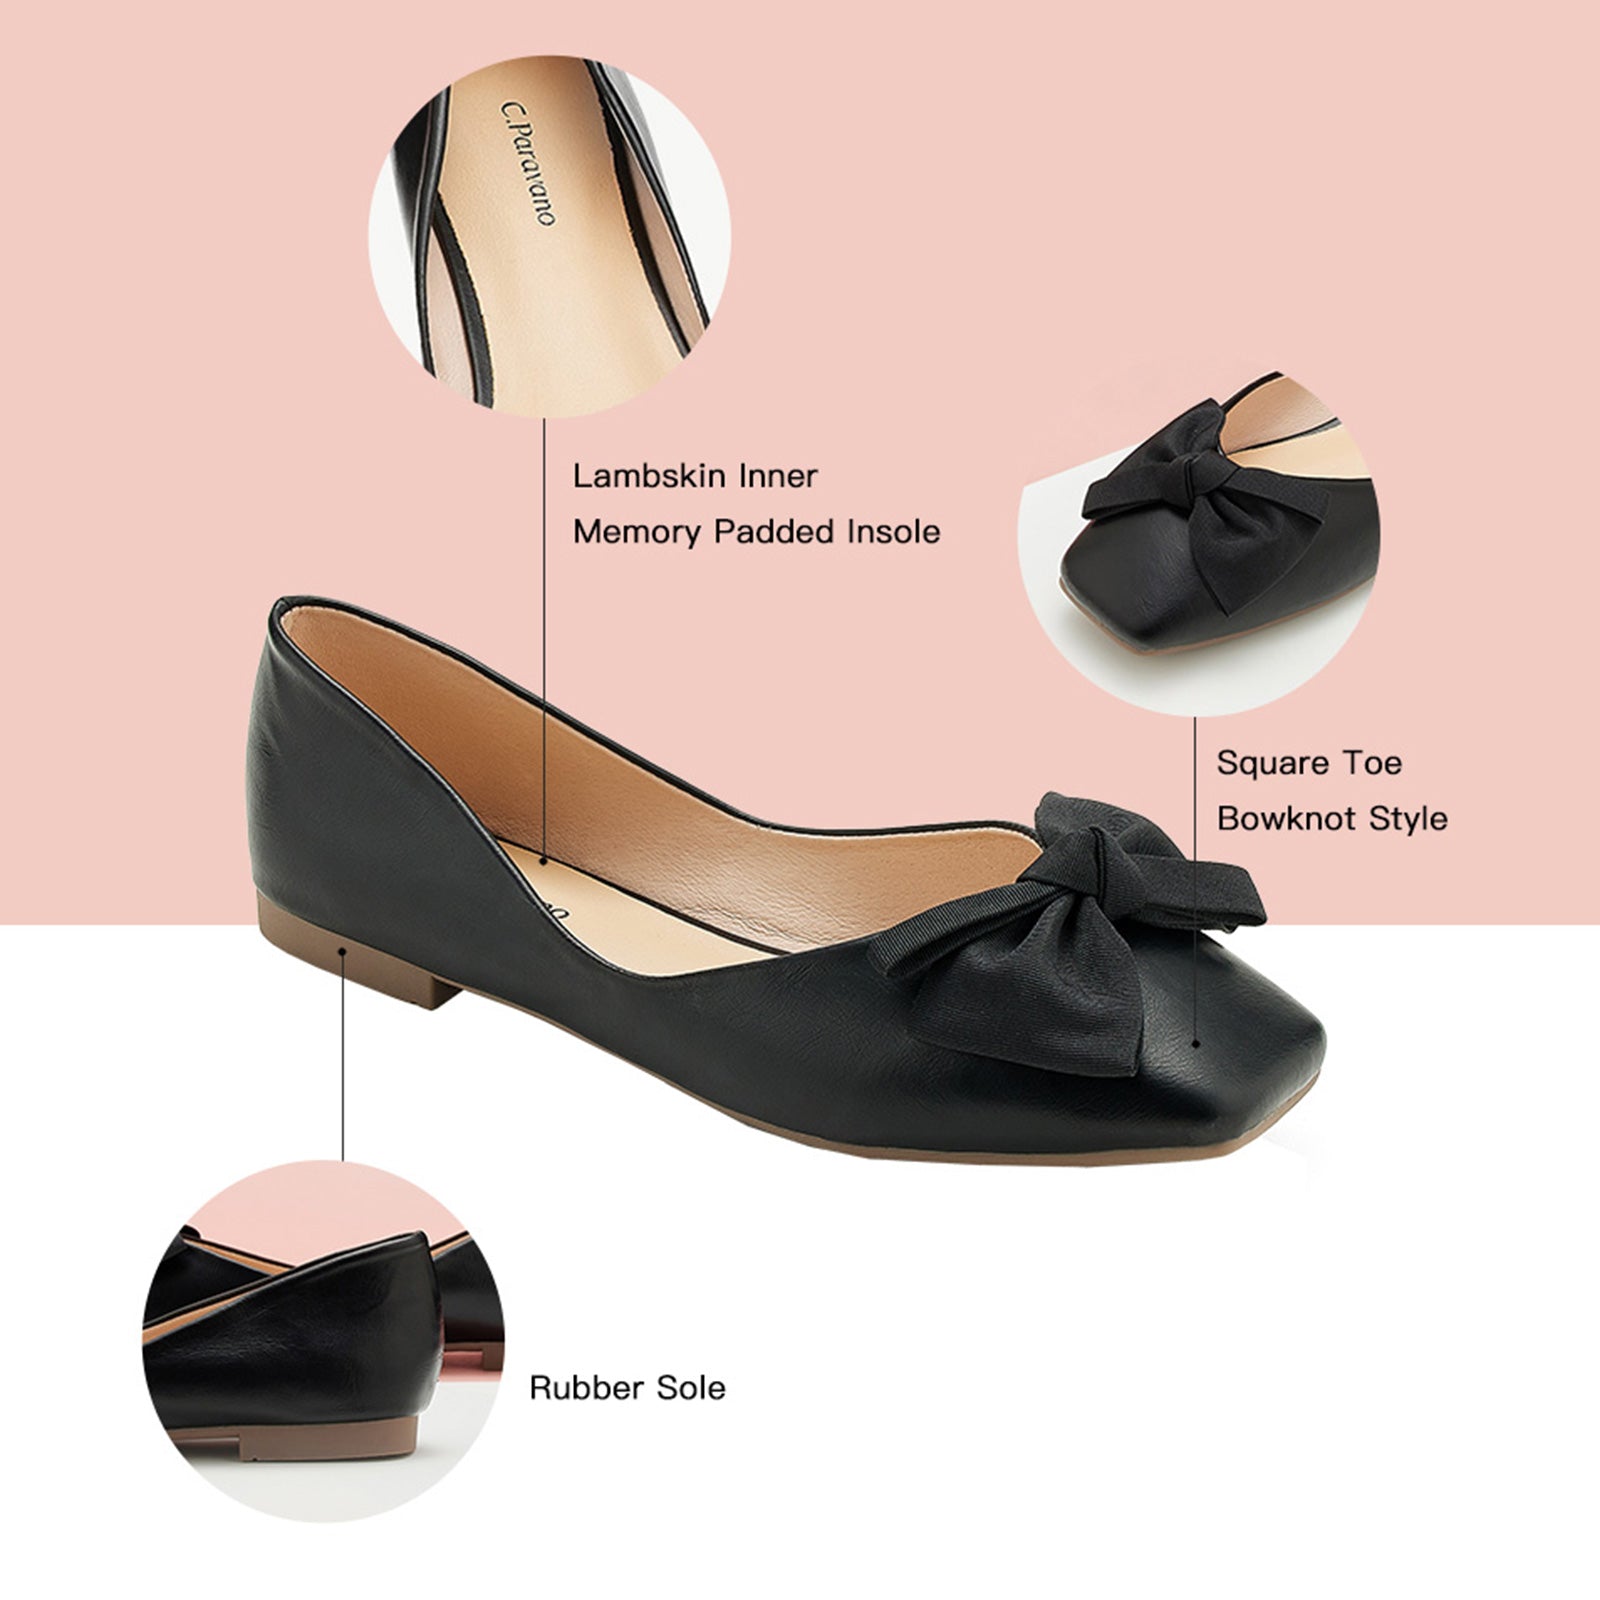 Make a sleek and stylish statement with these black square-toe flats, adorned with a chic bowknot and crafted from soft, high-quality leather for a polished look.